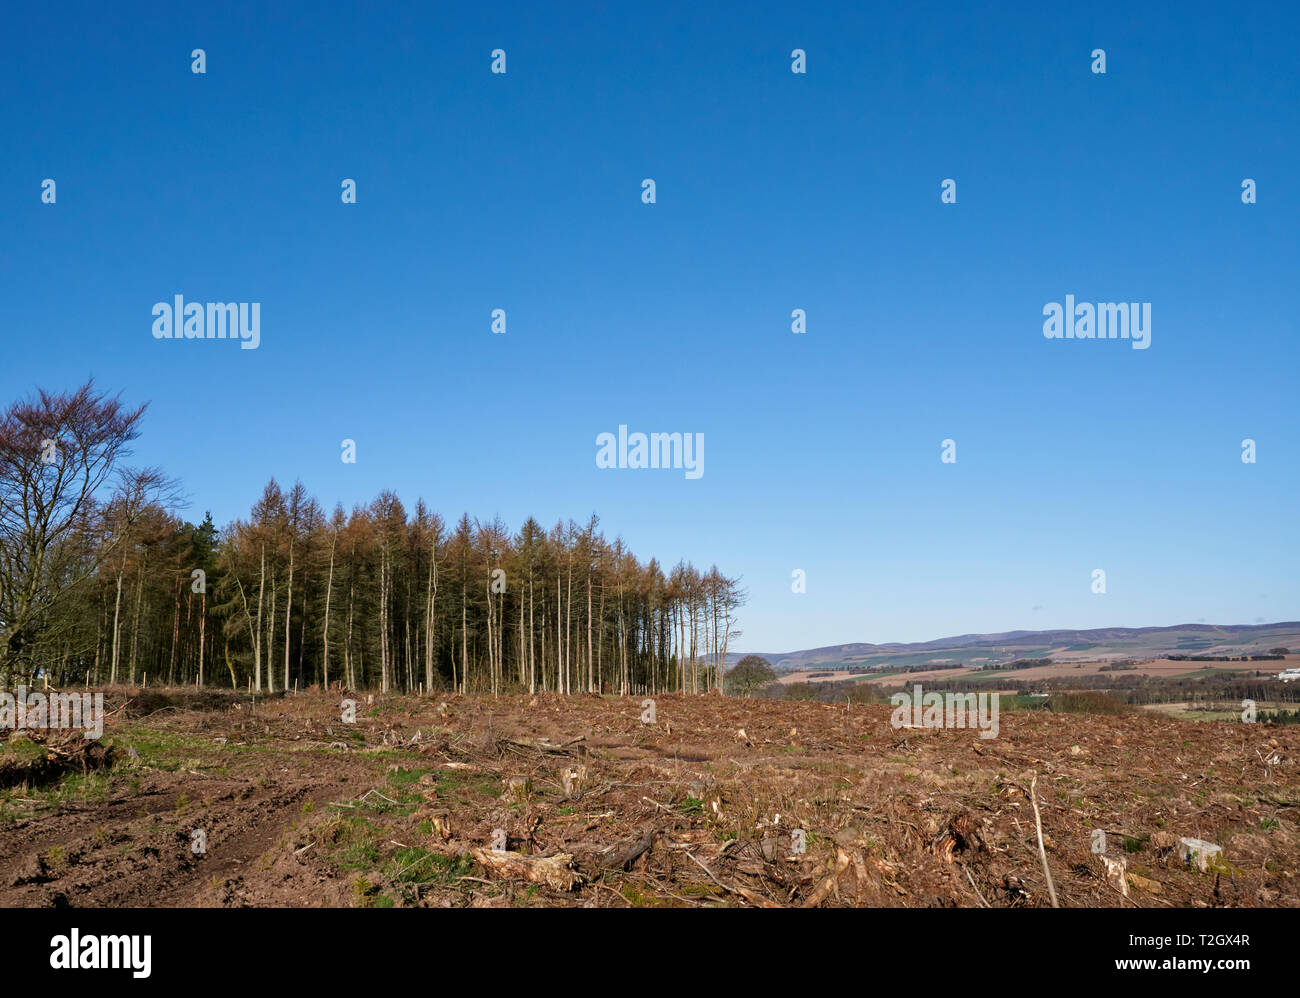 Tree Felling operations above Brechin in the Angus Countryside, where Mixed woodland is being cleared creating disturbed ground. Scotland. Stock Photo